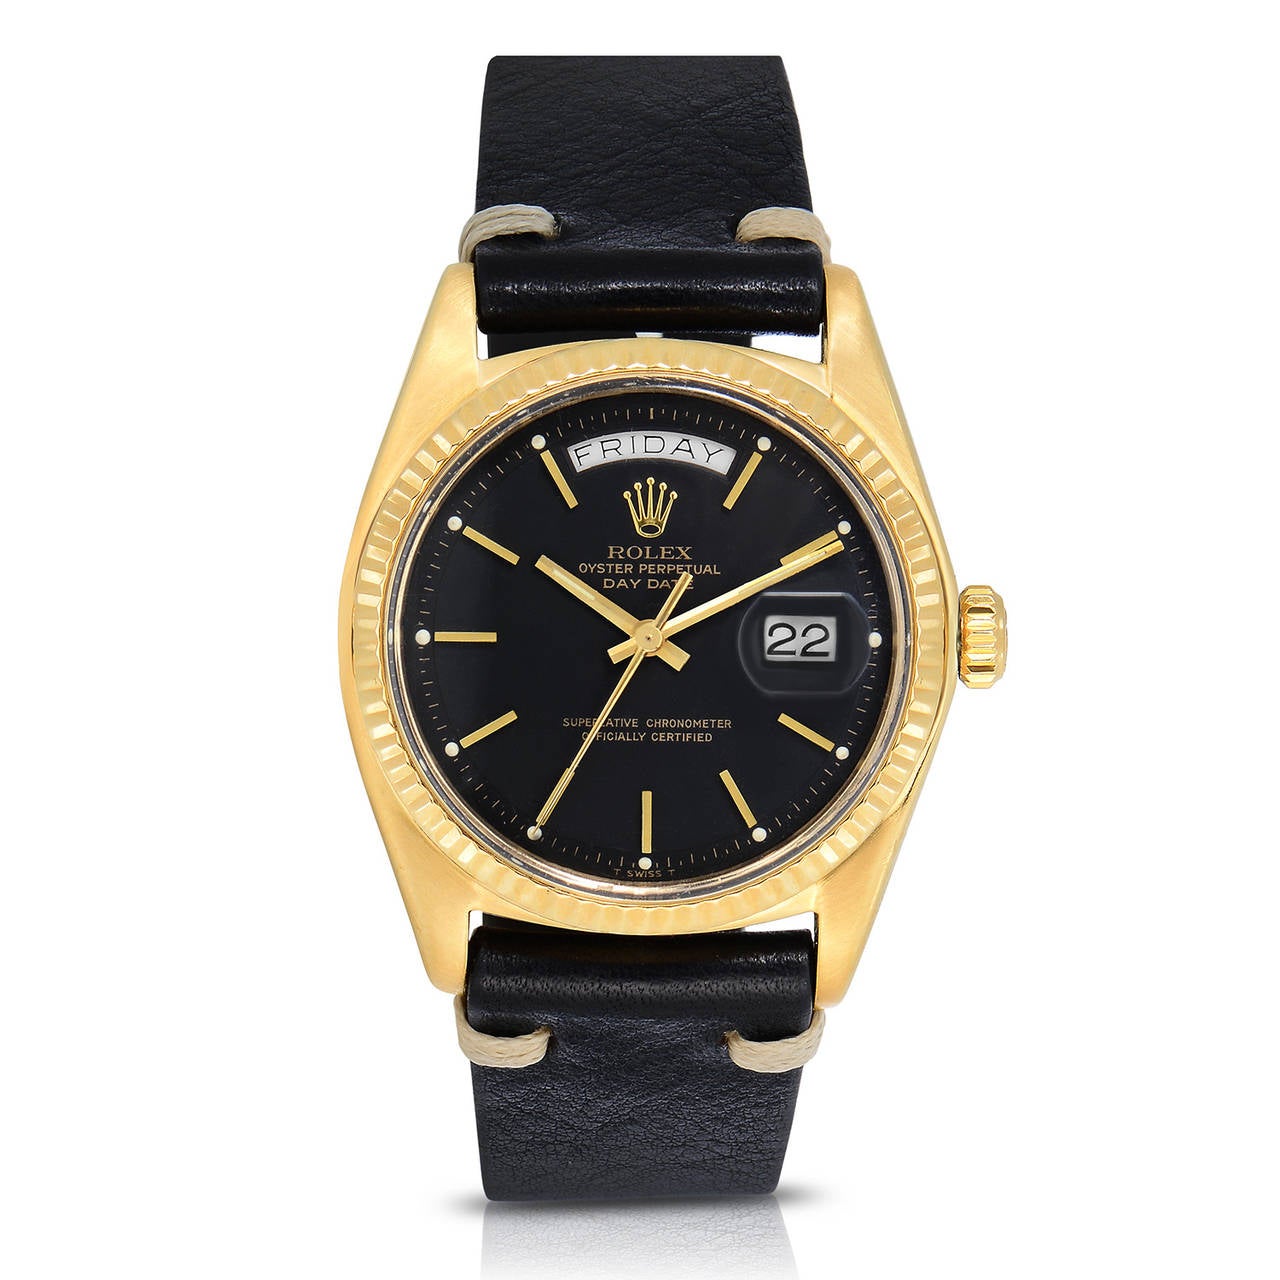 Rolex Oyster Perpetual Day-Date 18K Yellow Gold Watch
Solid 18K Yellow Gold Case
36MM in Size
Factory Black Matte Dial
Circa 1968
Handmade Custom Black Leather Strap with White Contrast Stitching